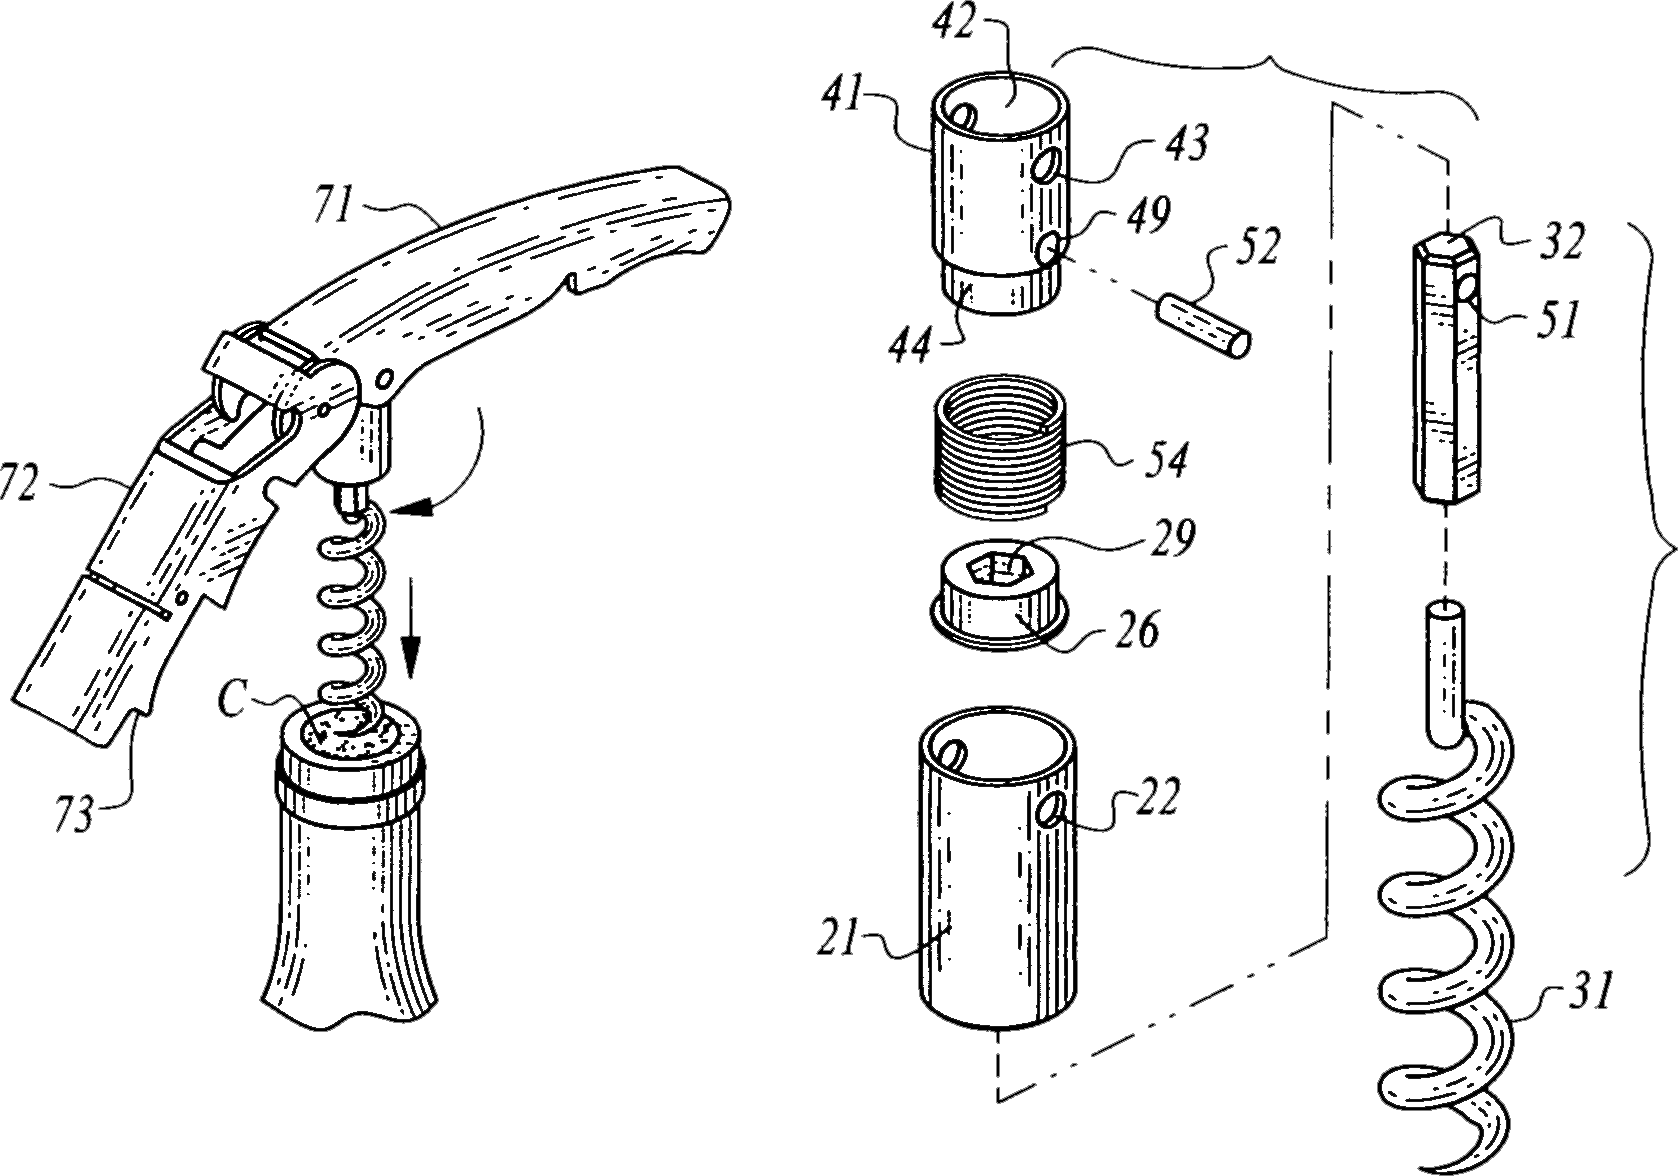 drawing of the different opperating parts of a corkscrew